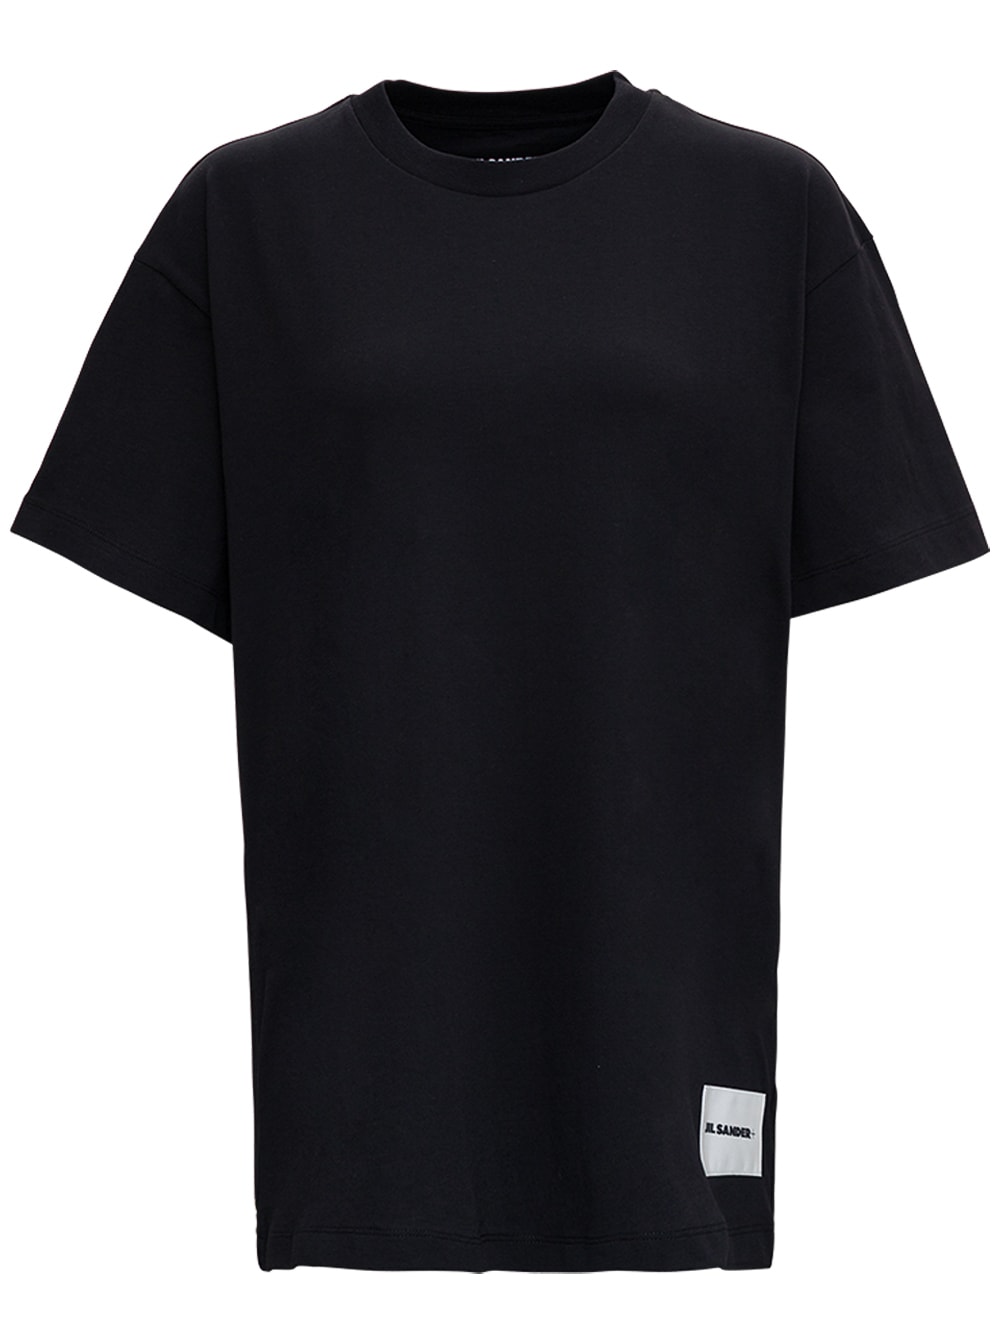 Shop Jil Sander Black T-shirt Three-pack In Cotton With Logo Patch At The Bottom Man